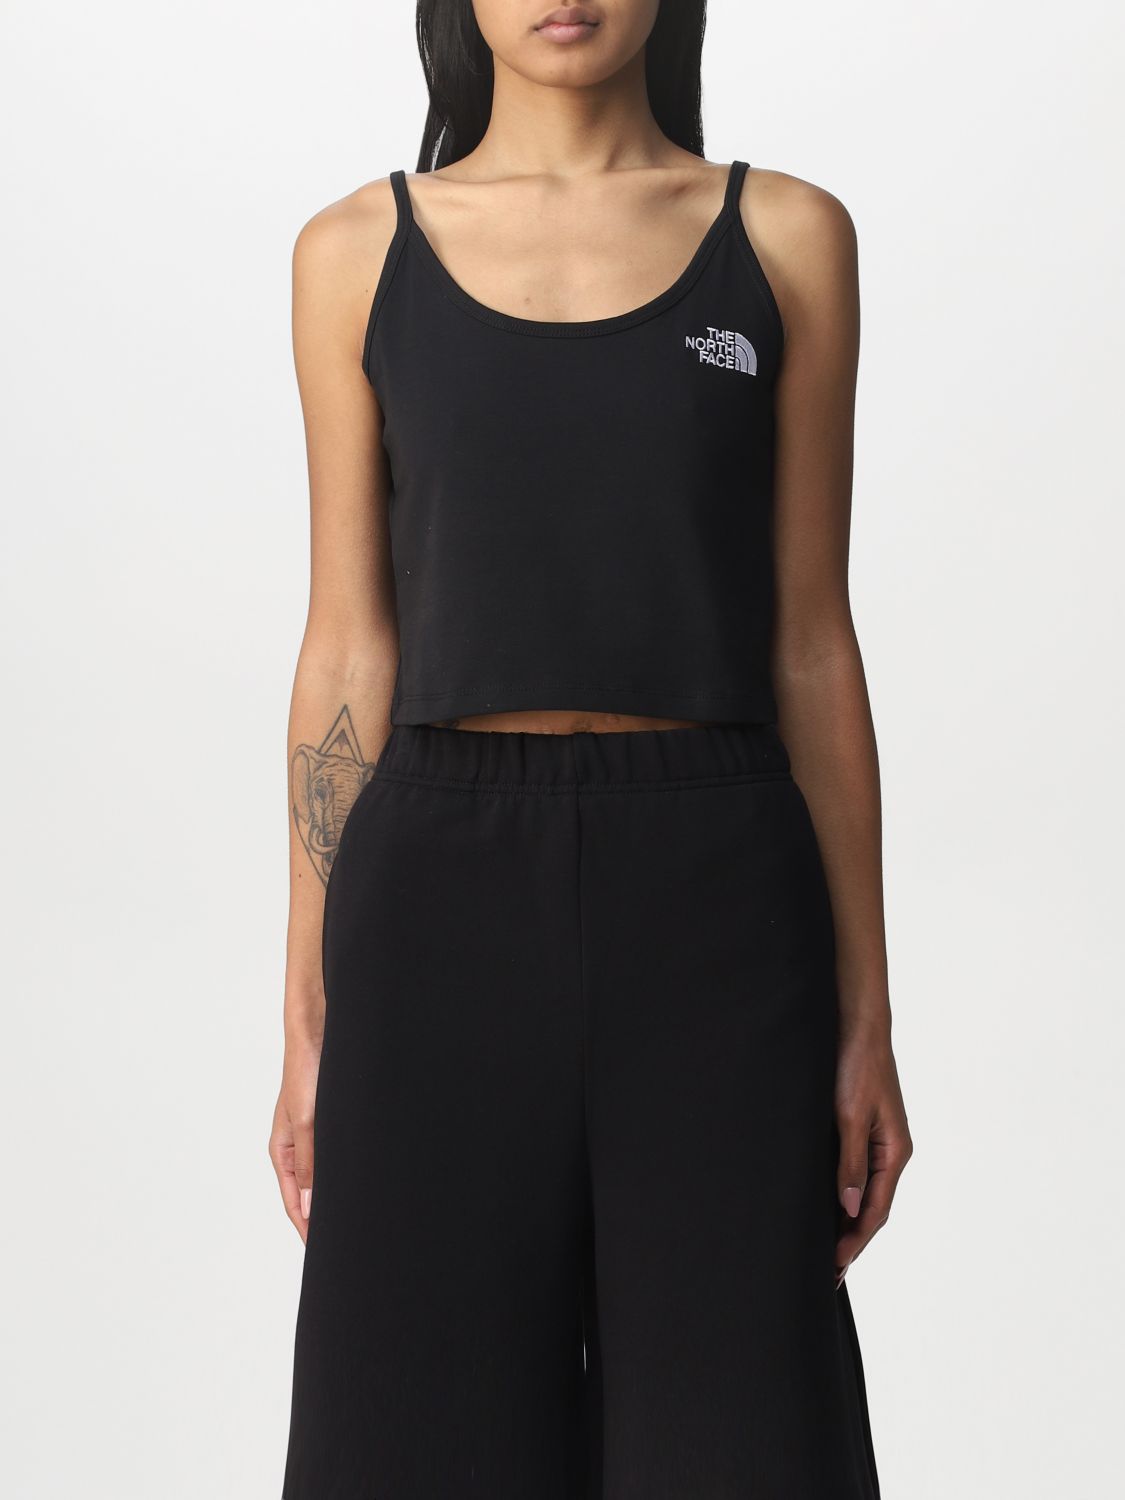 Top The North Face: Top mujer The North Face negro 1